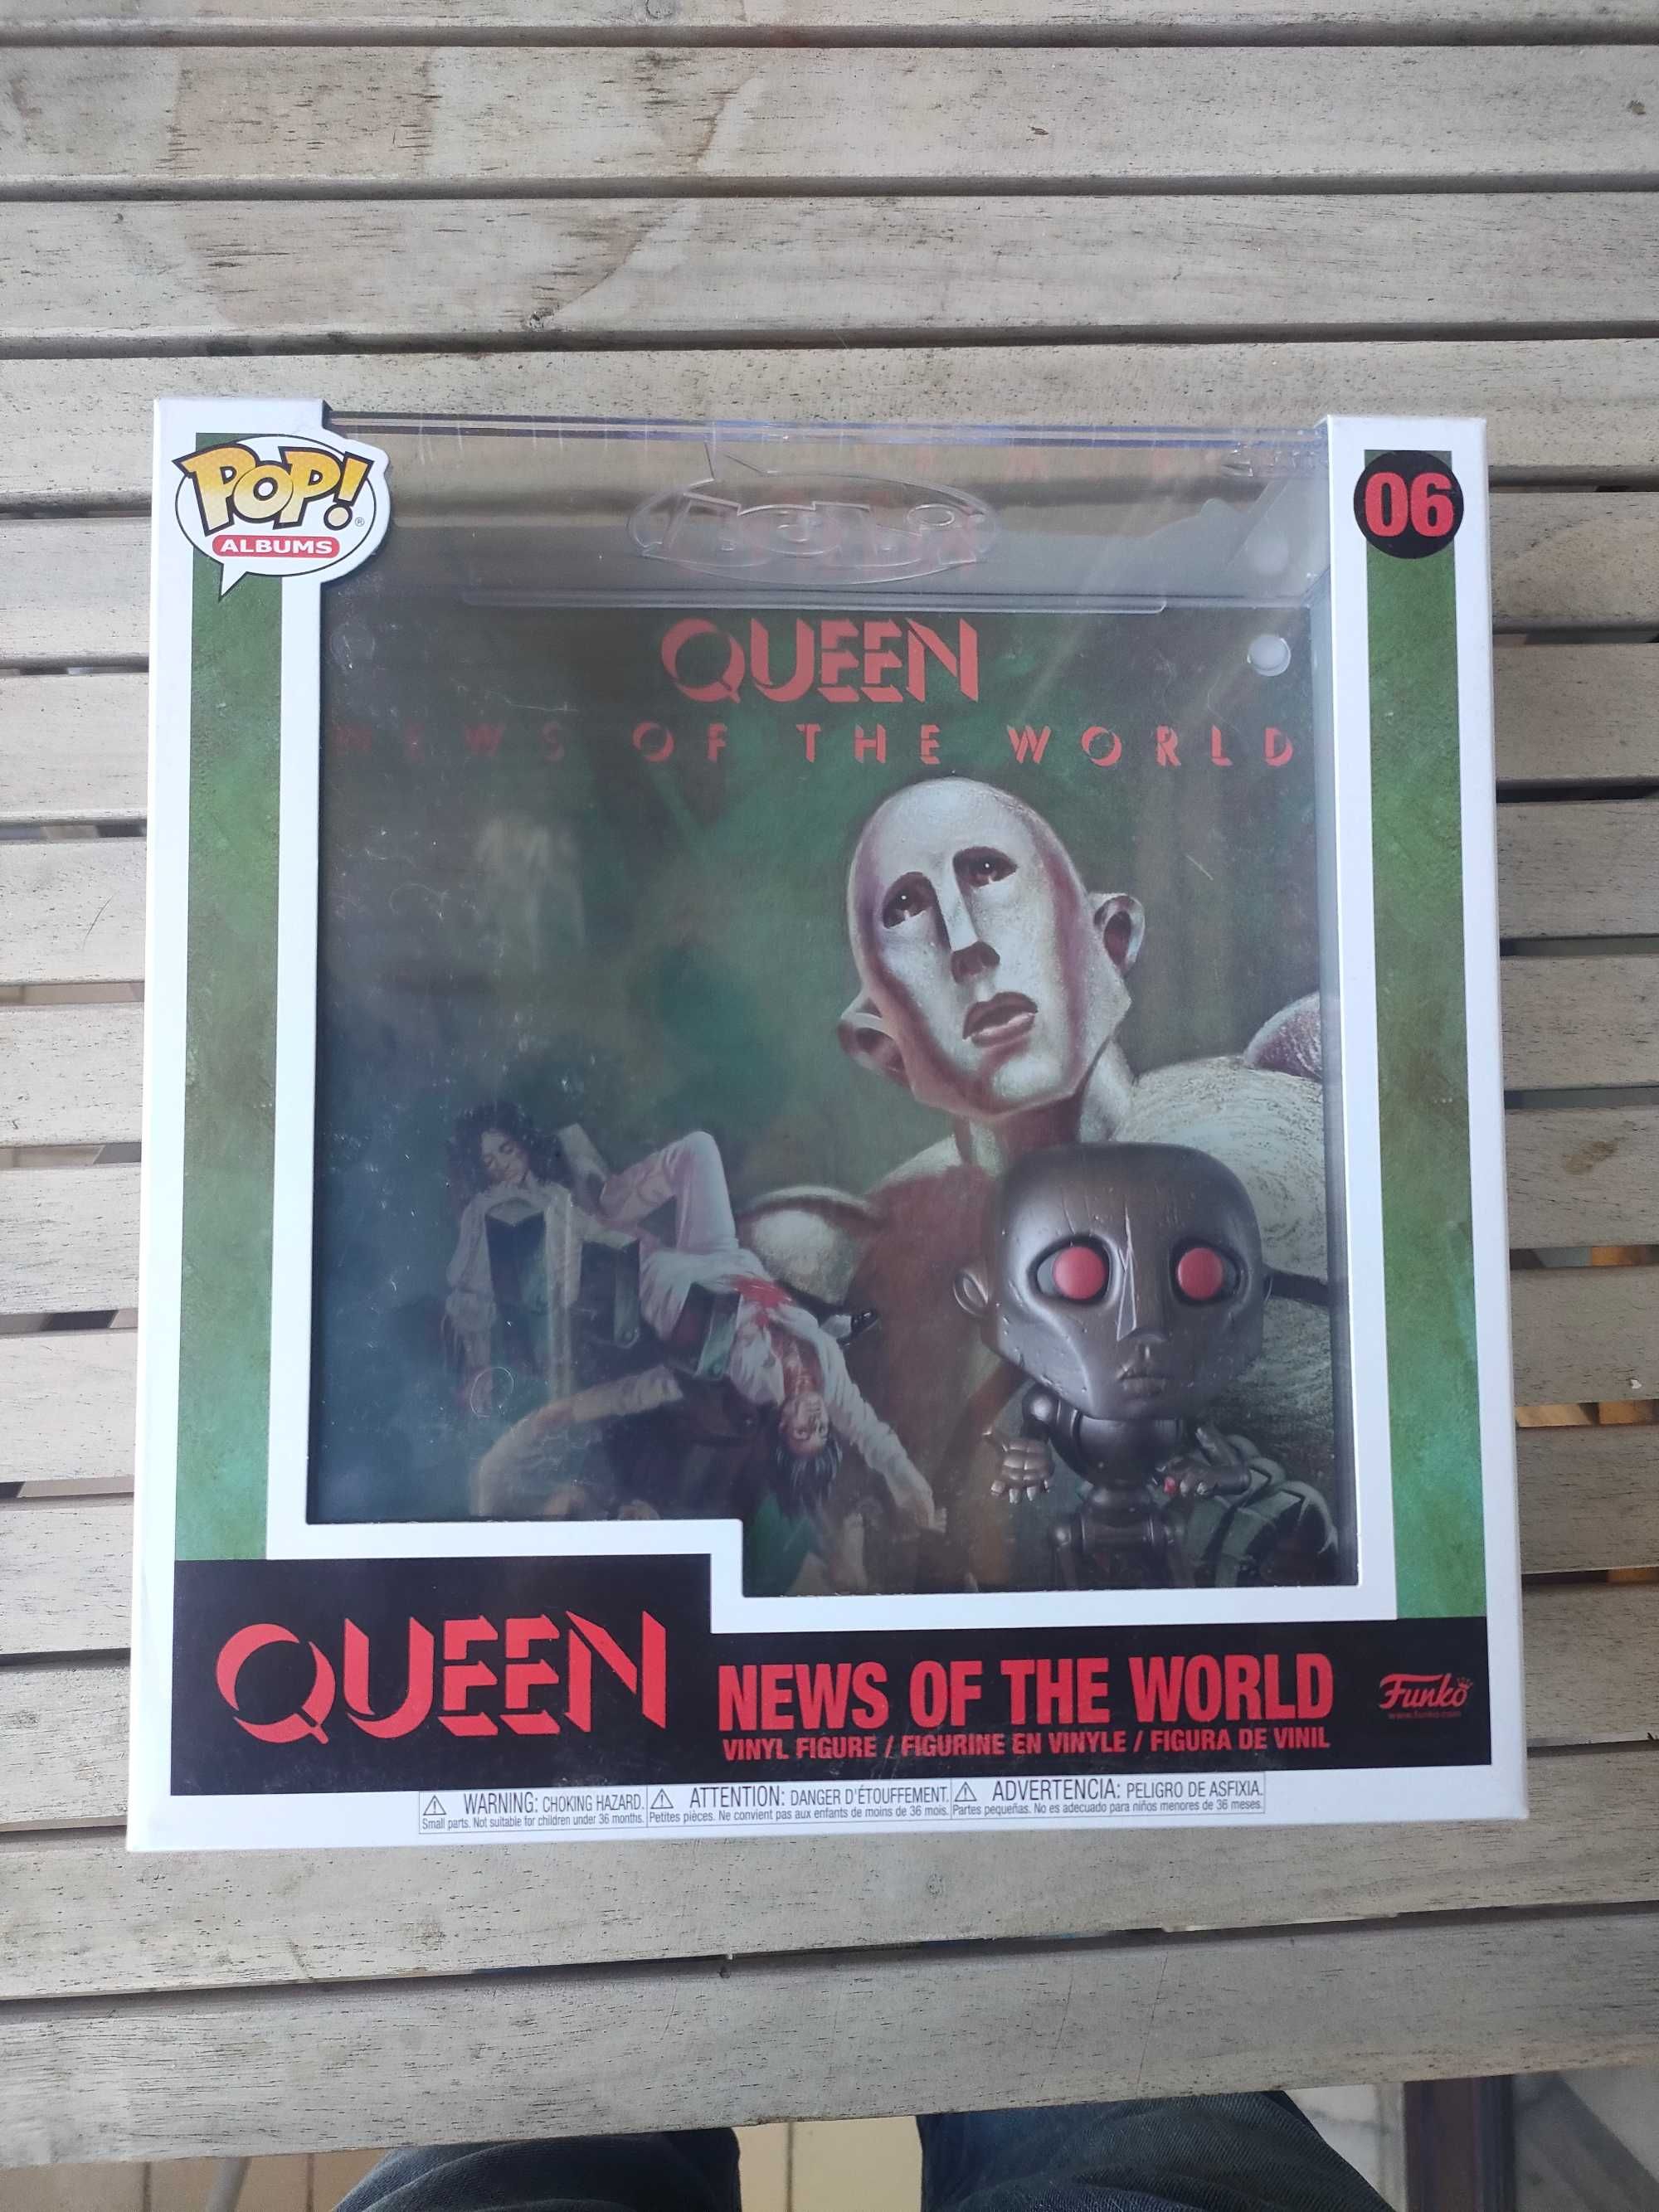 Funko Pop Albums
Queen News Of The World